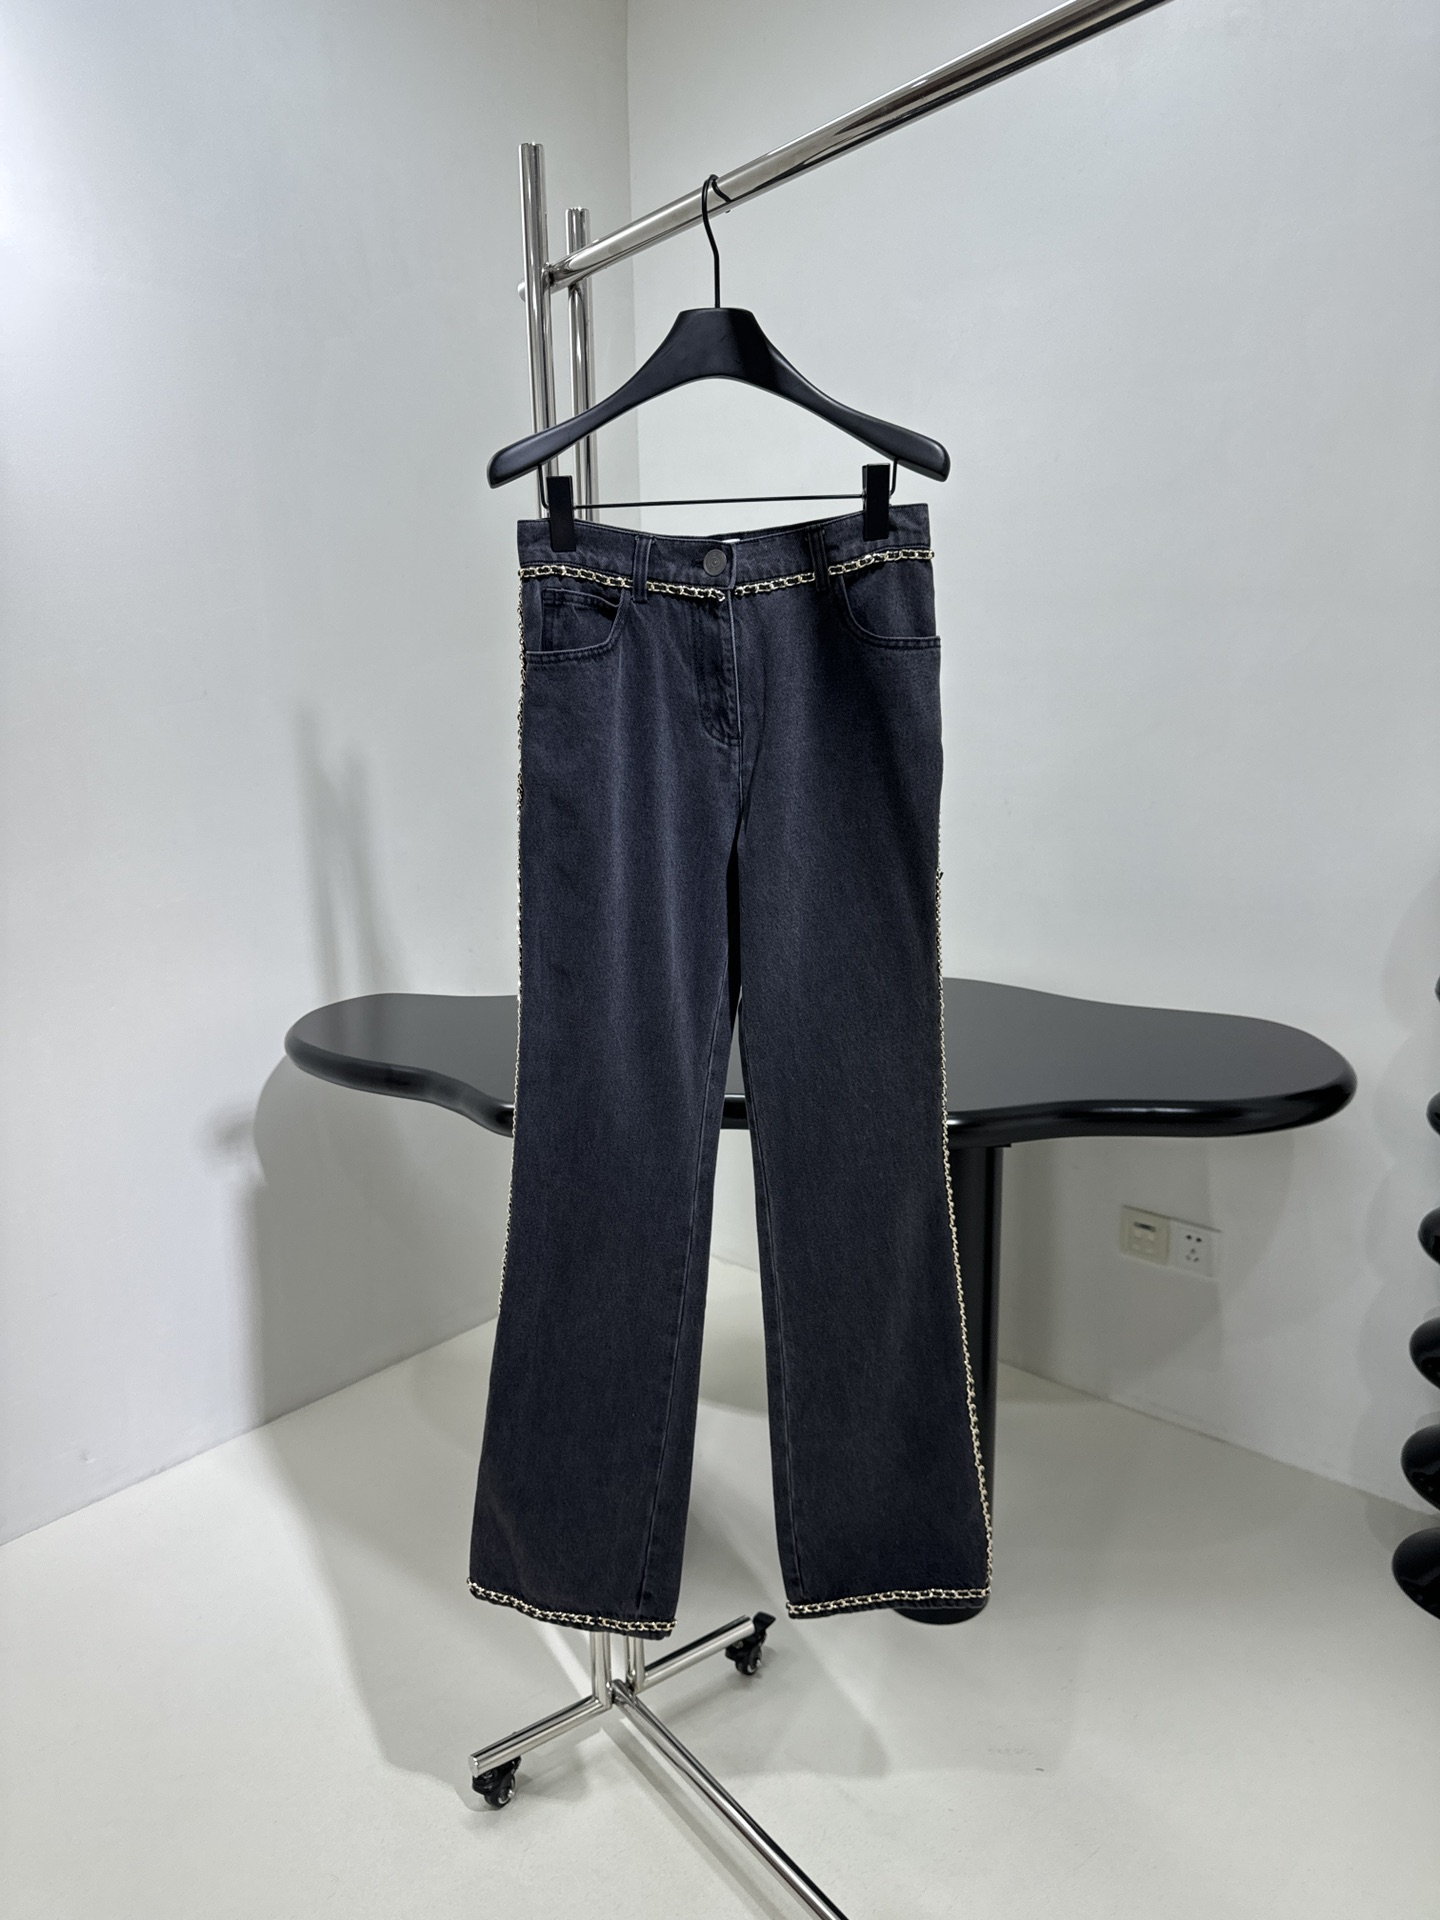 Chanel Clothing Jeans Pants & Trousers Black Blue Embroidery Cotton Knitting Spring Collection Chains